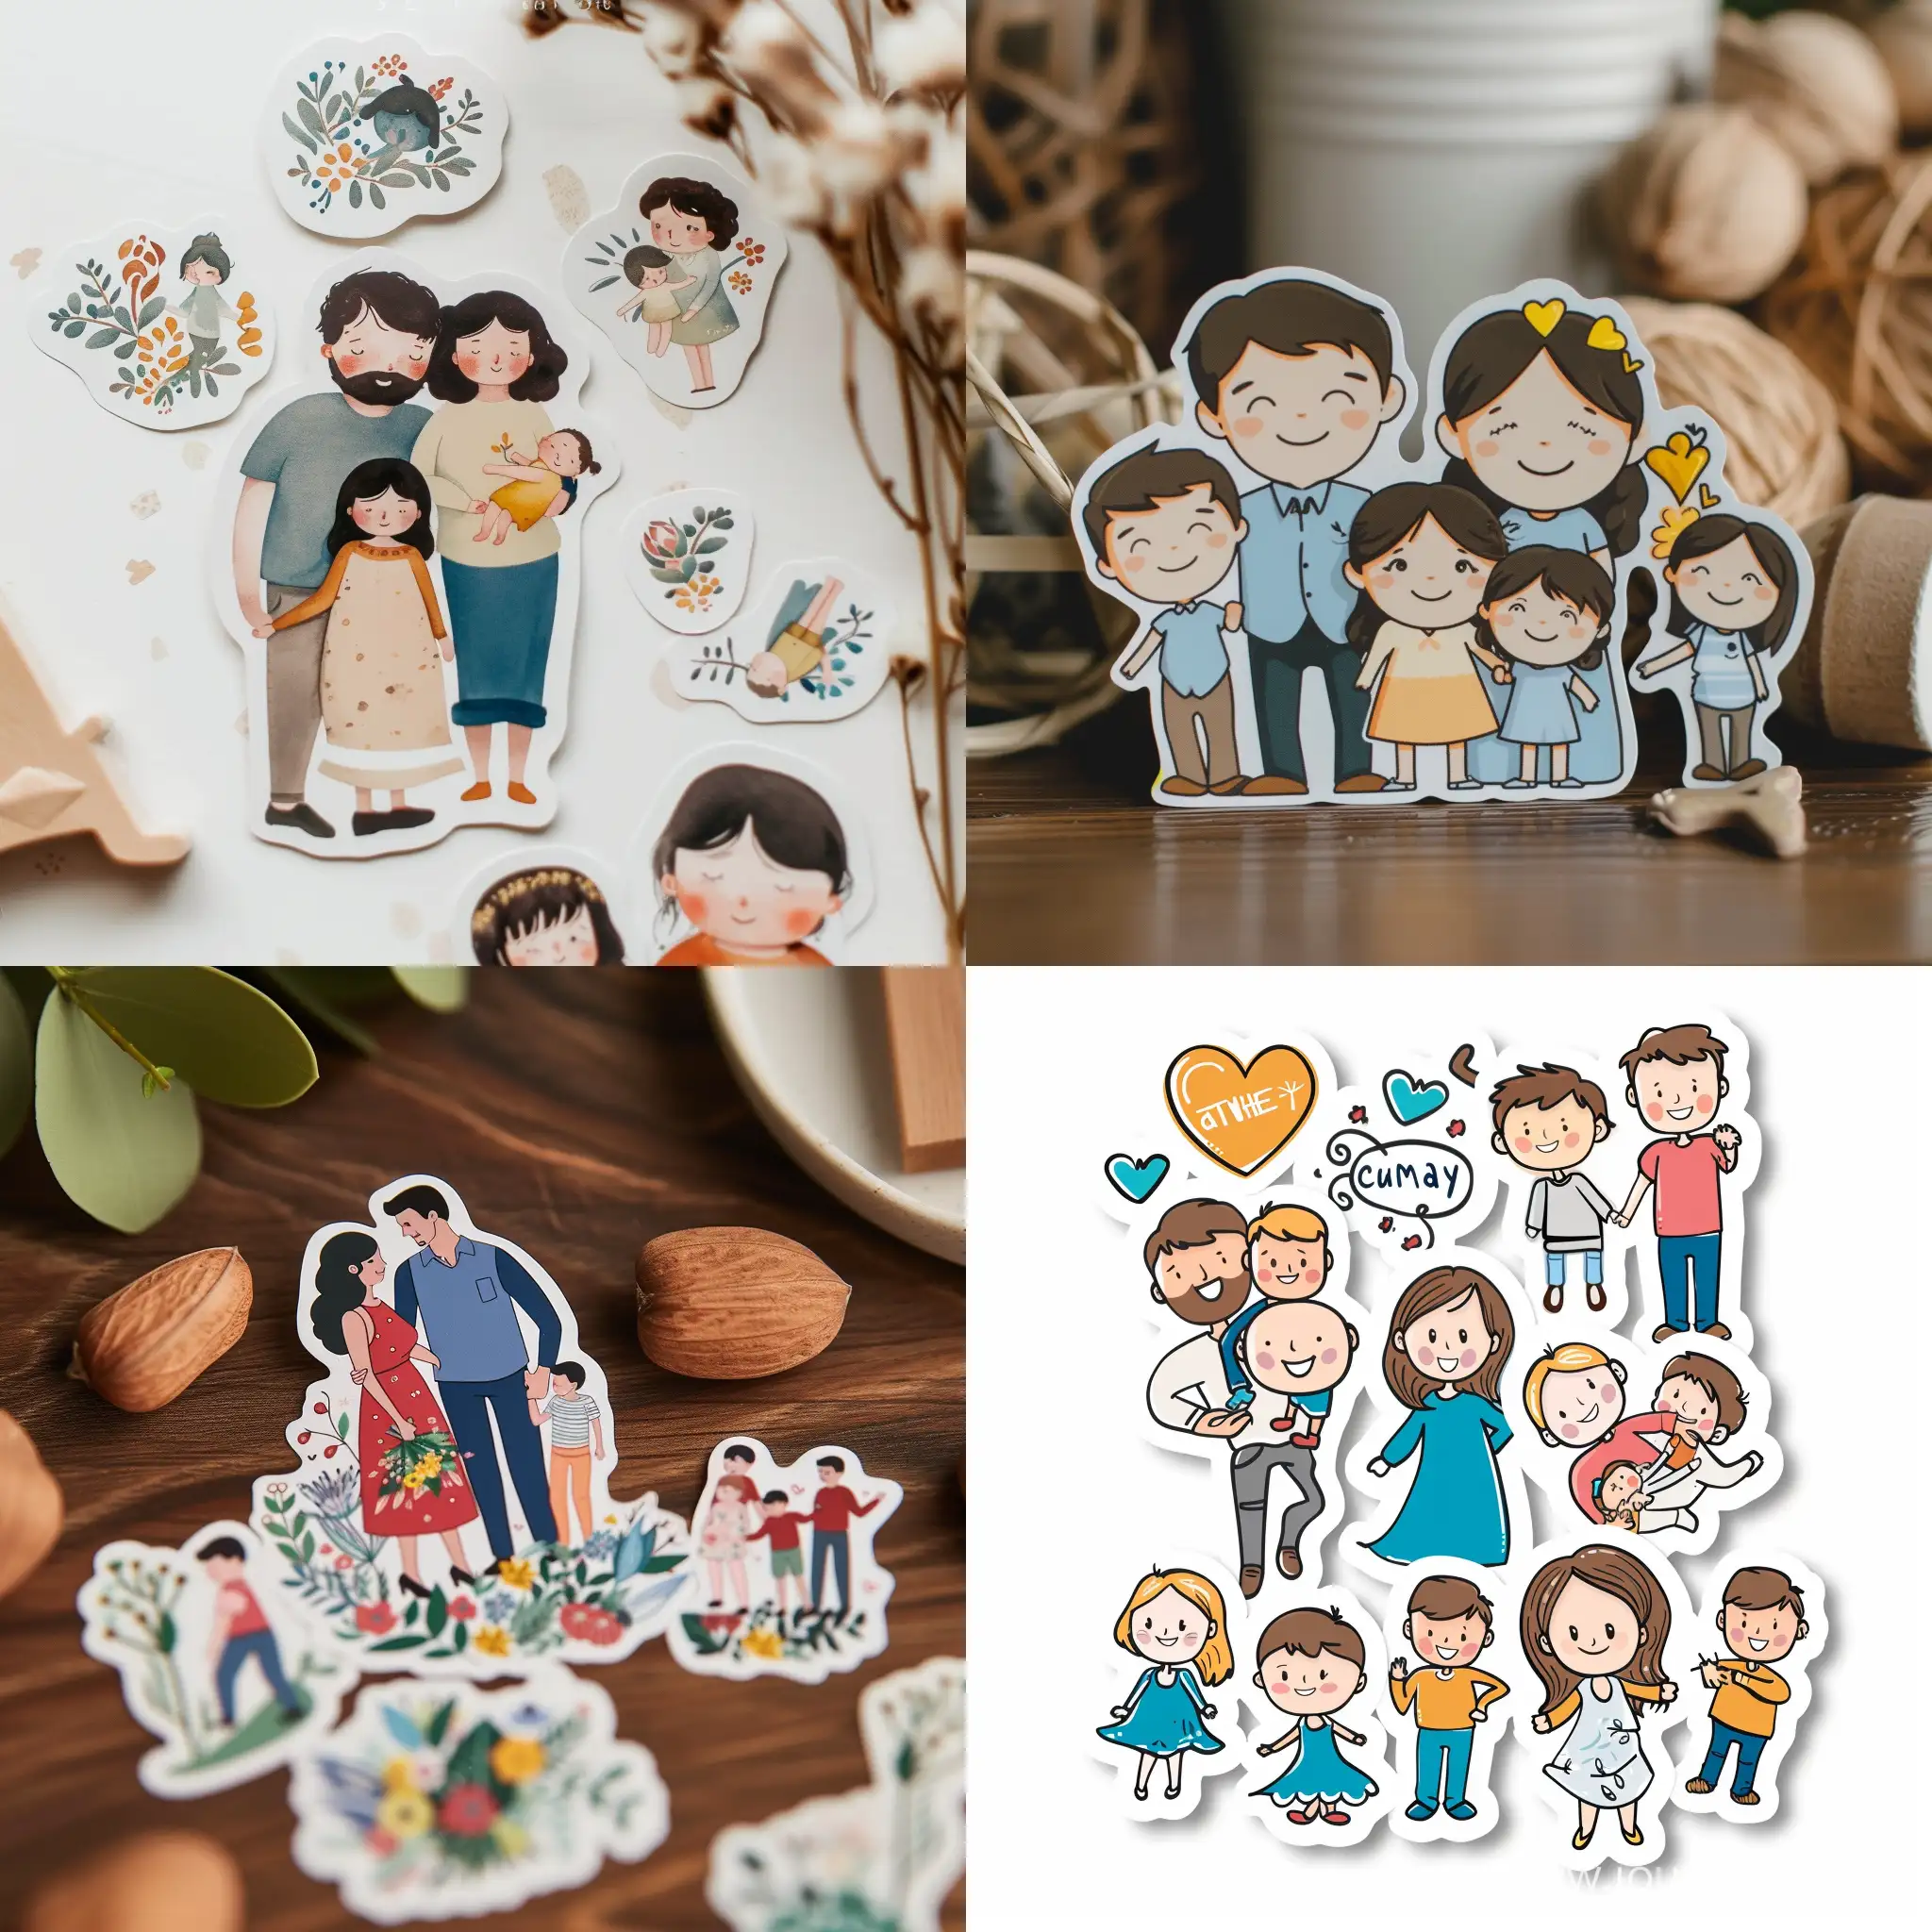 Multigenerational-Family-Sticker-Collection-Diverse-Characters-Bonding-with-Love-and-Joy